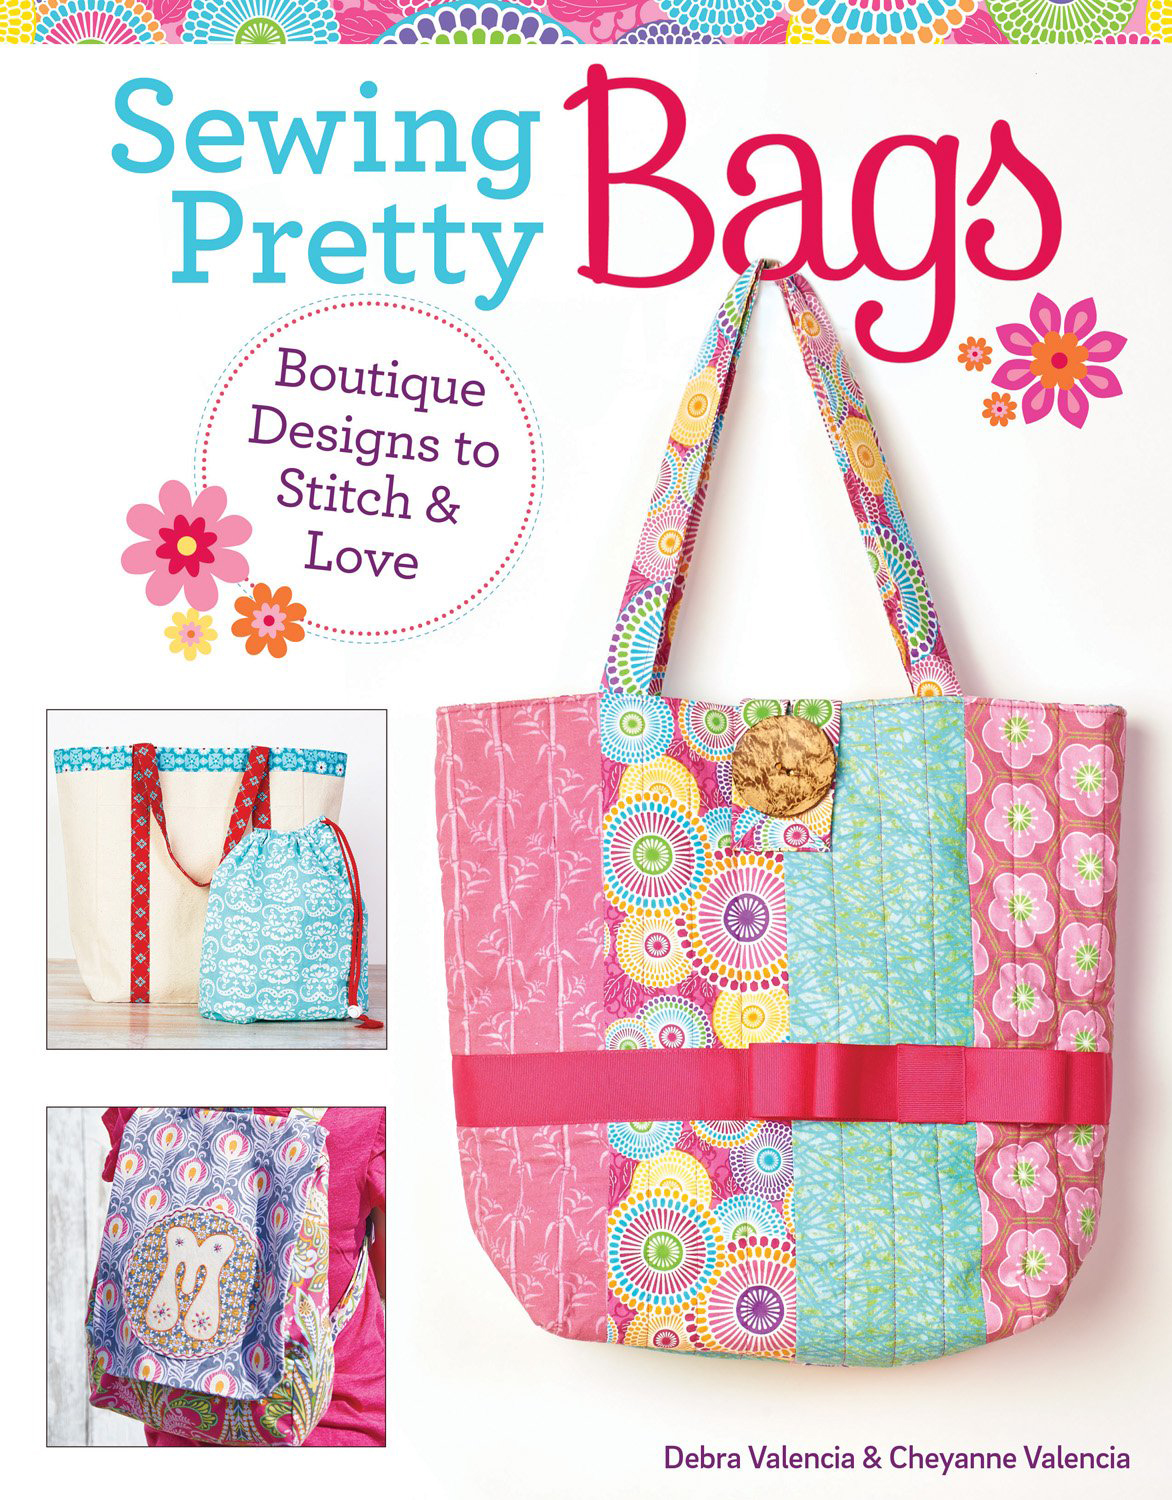 Sewing-Pretty-Bags